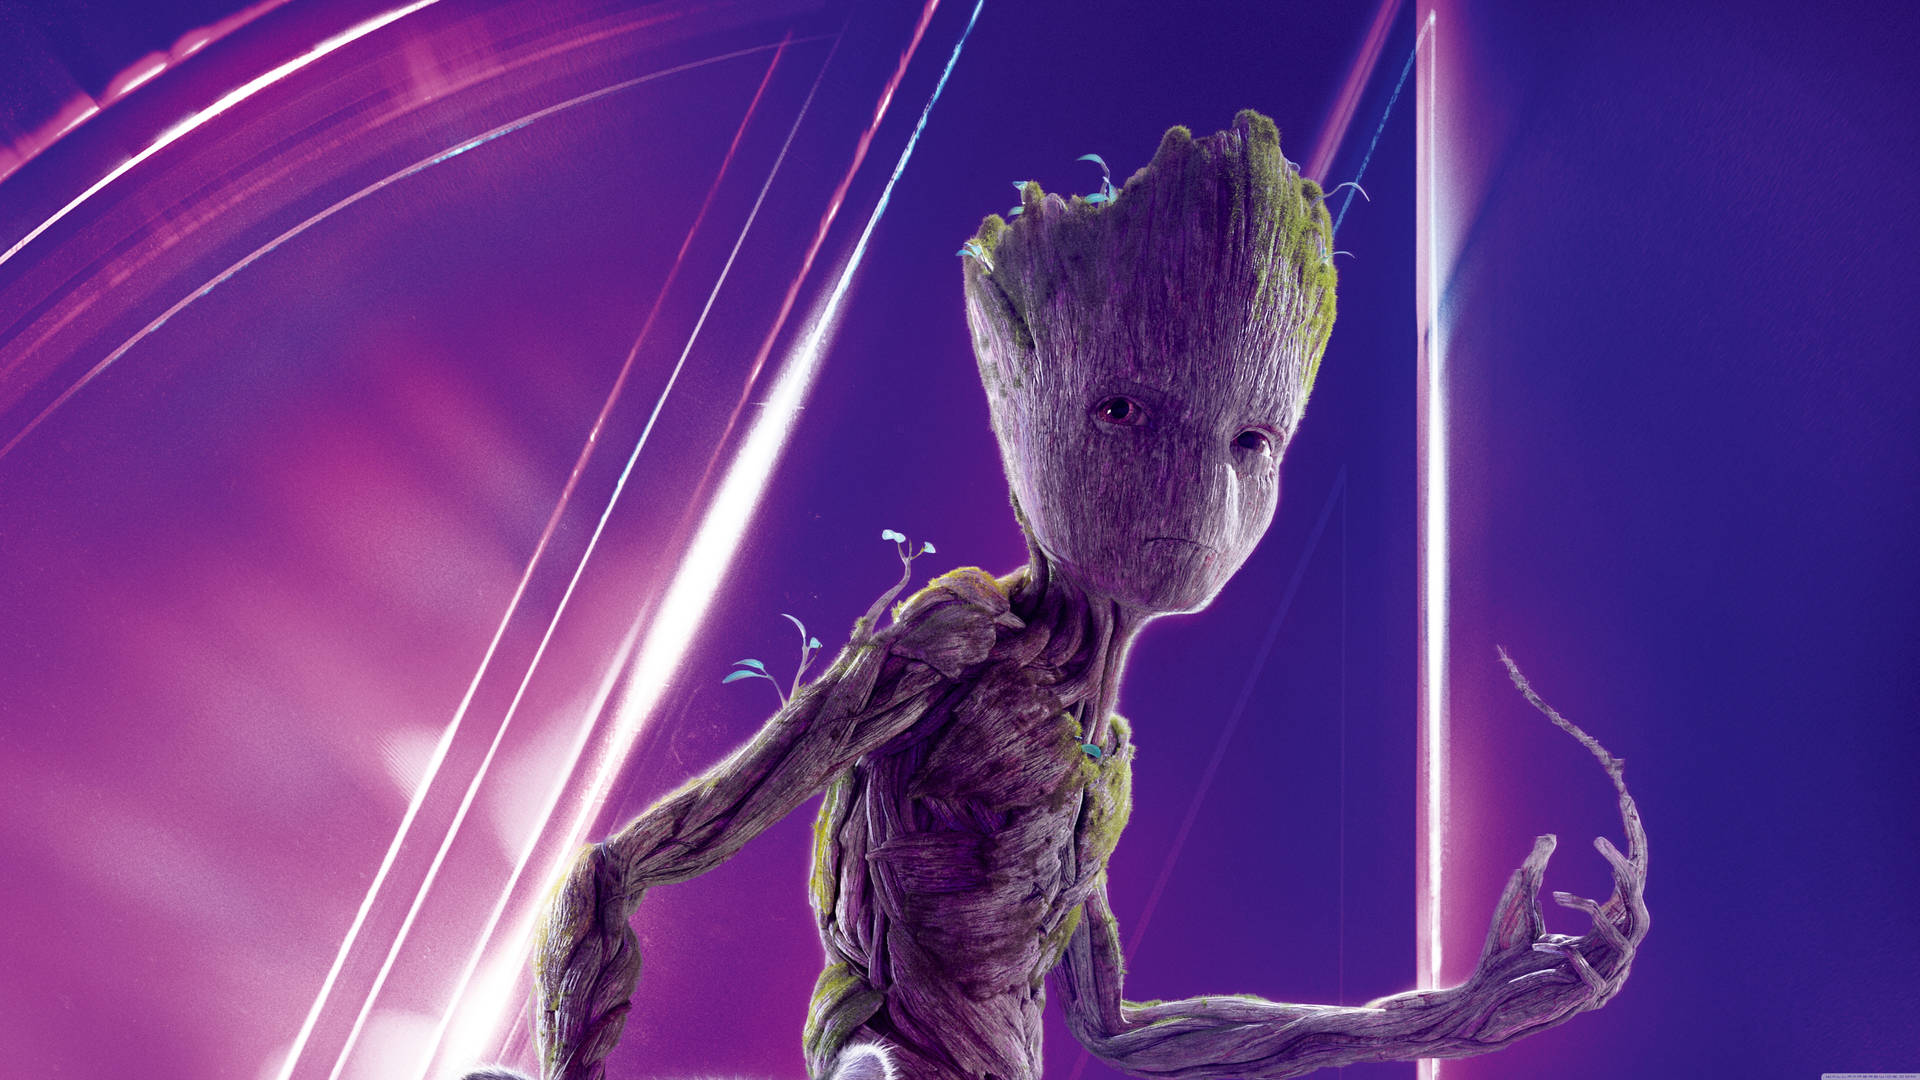 Free Groot Wallpaper Downloads, [100+] Groot Wallpapers for FREE |  